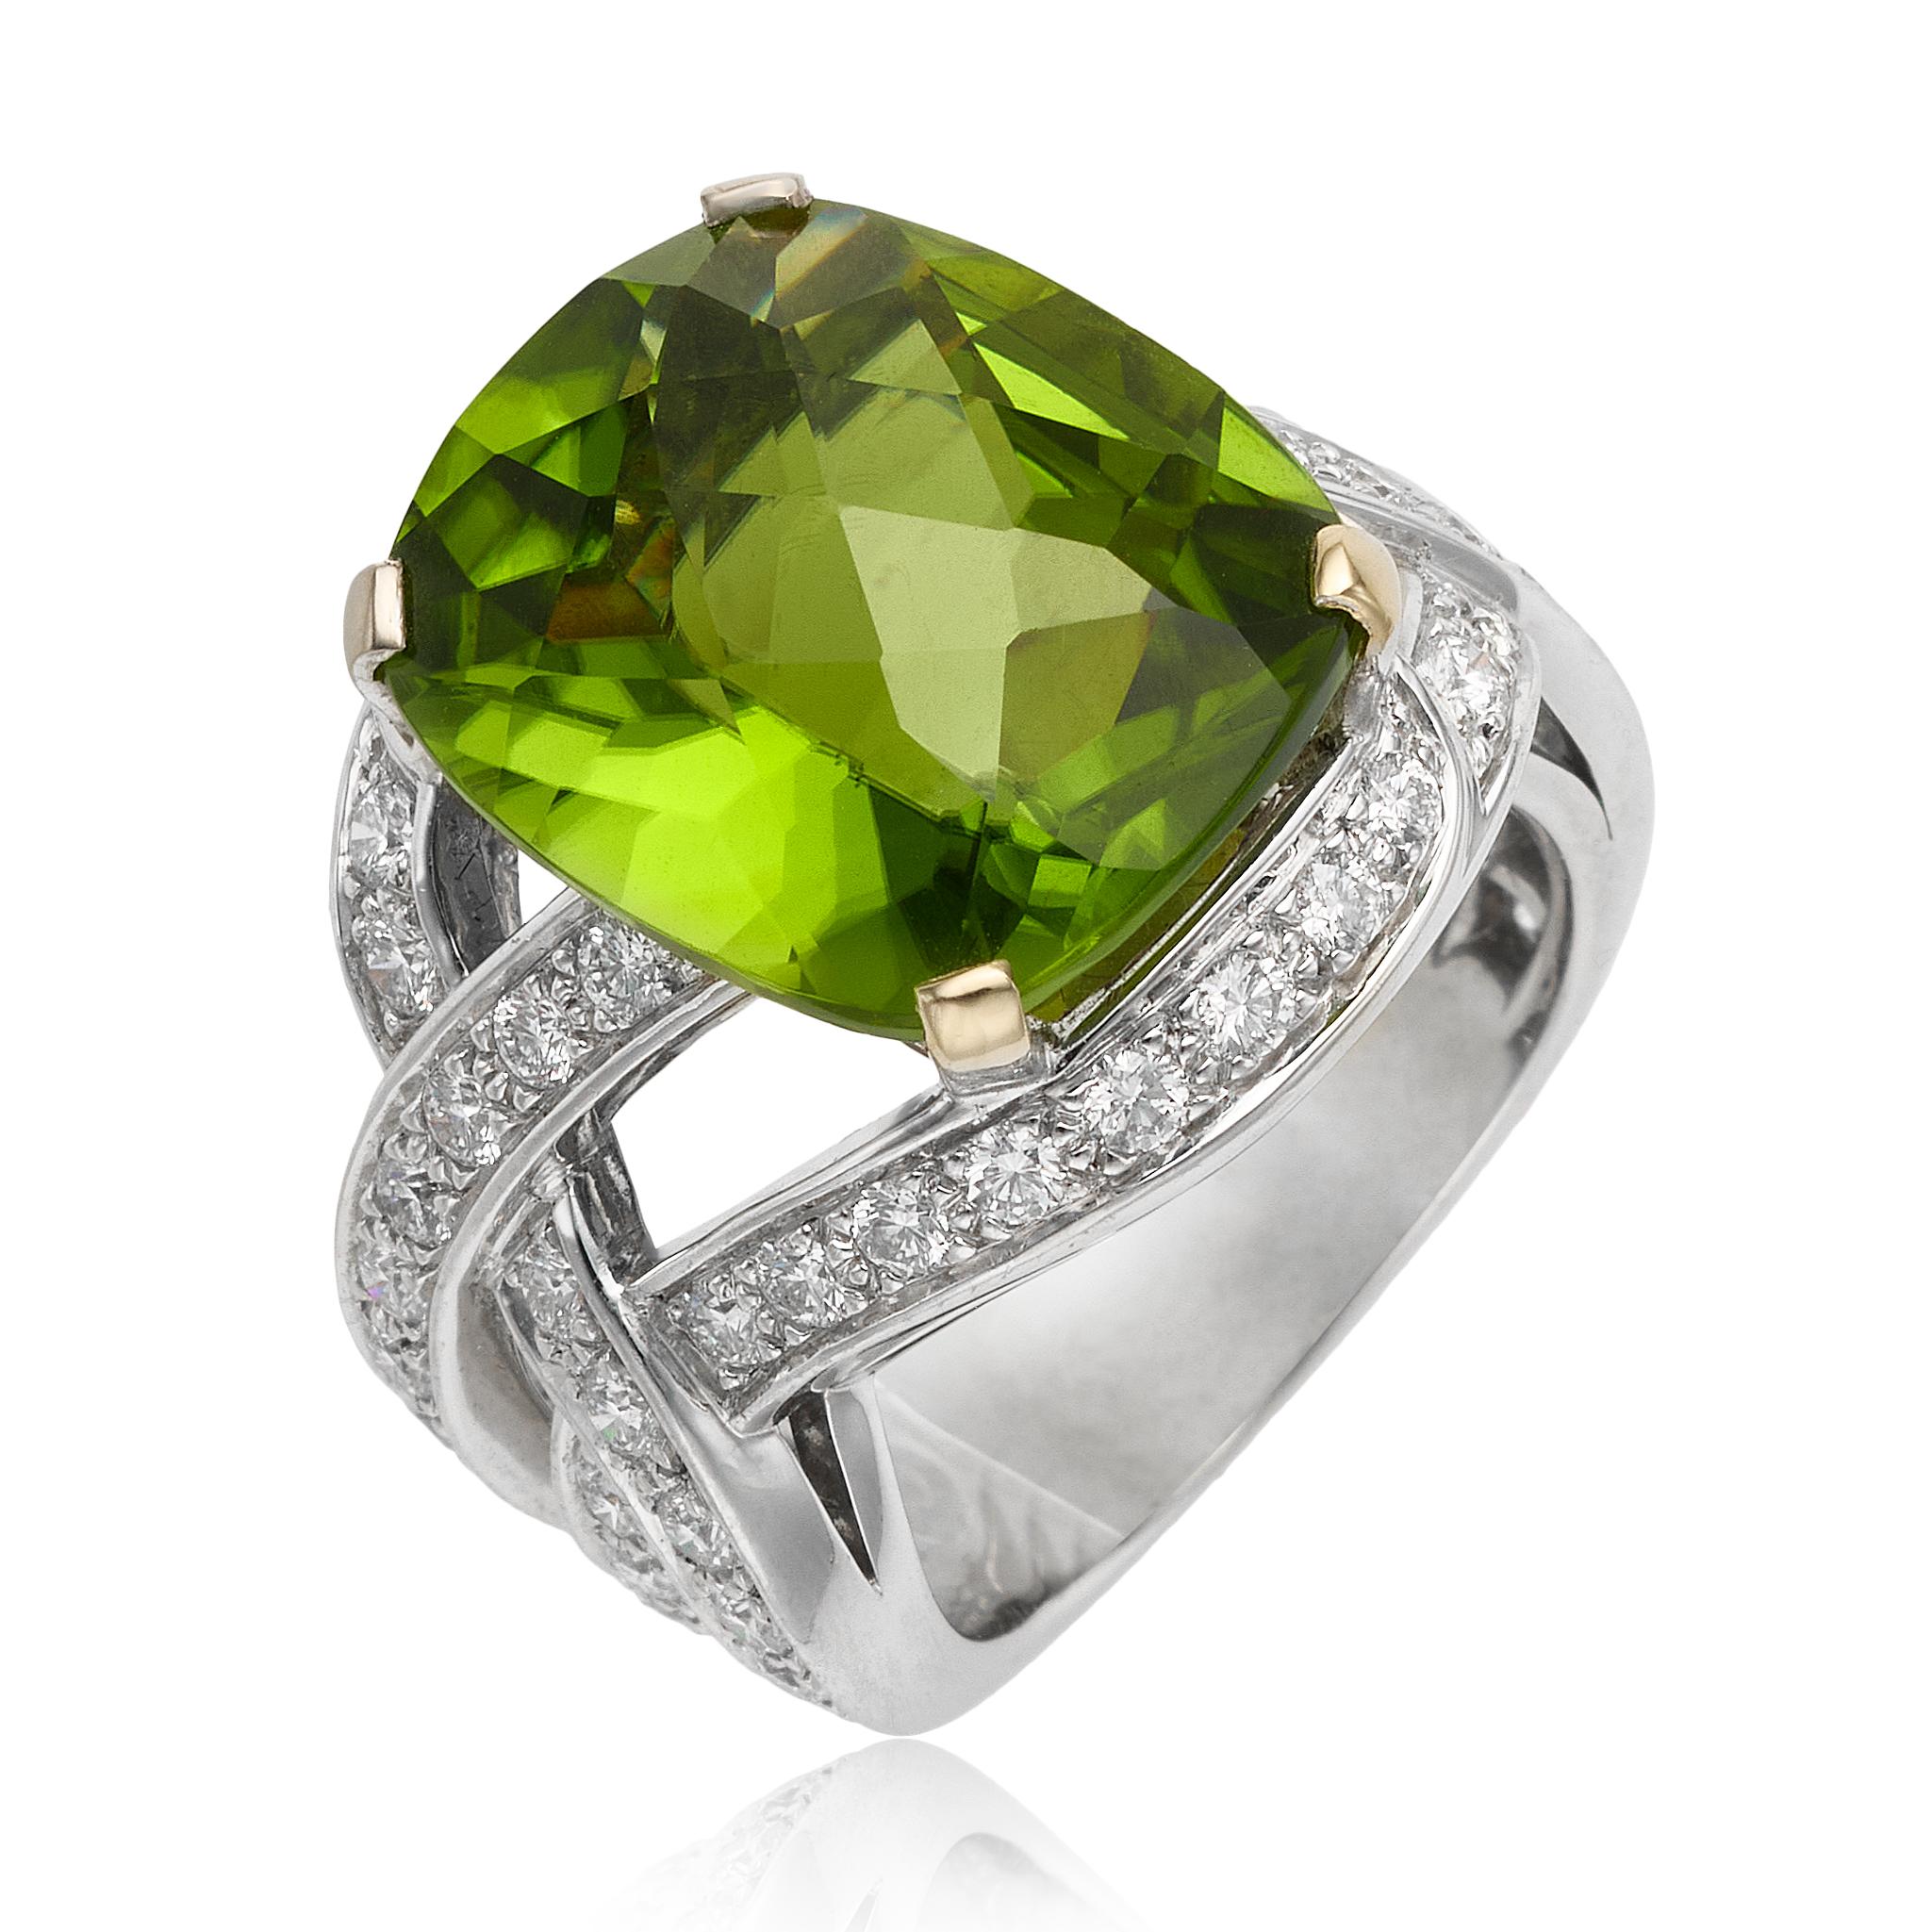 From designer Boucheron, 18 karat white gold peridot and diamond ring. This ring is crafted with a center 12.90 carat cushion cut peridot accented by round diamonds. These diamonds are pave set along the triple cross size 6.5 band. This ring is a